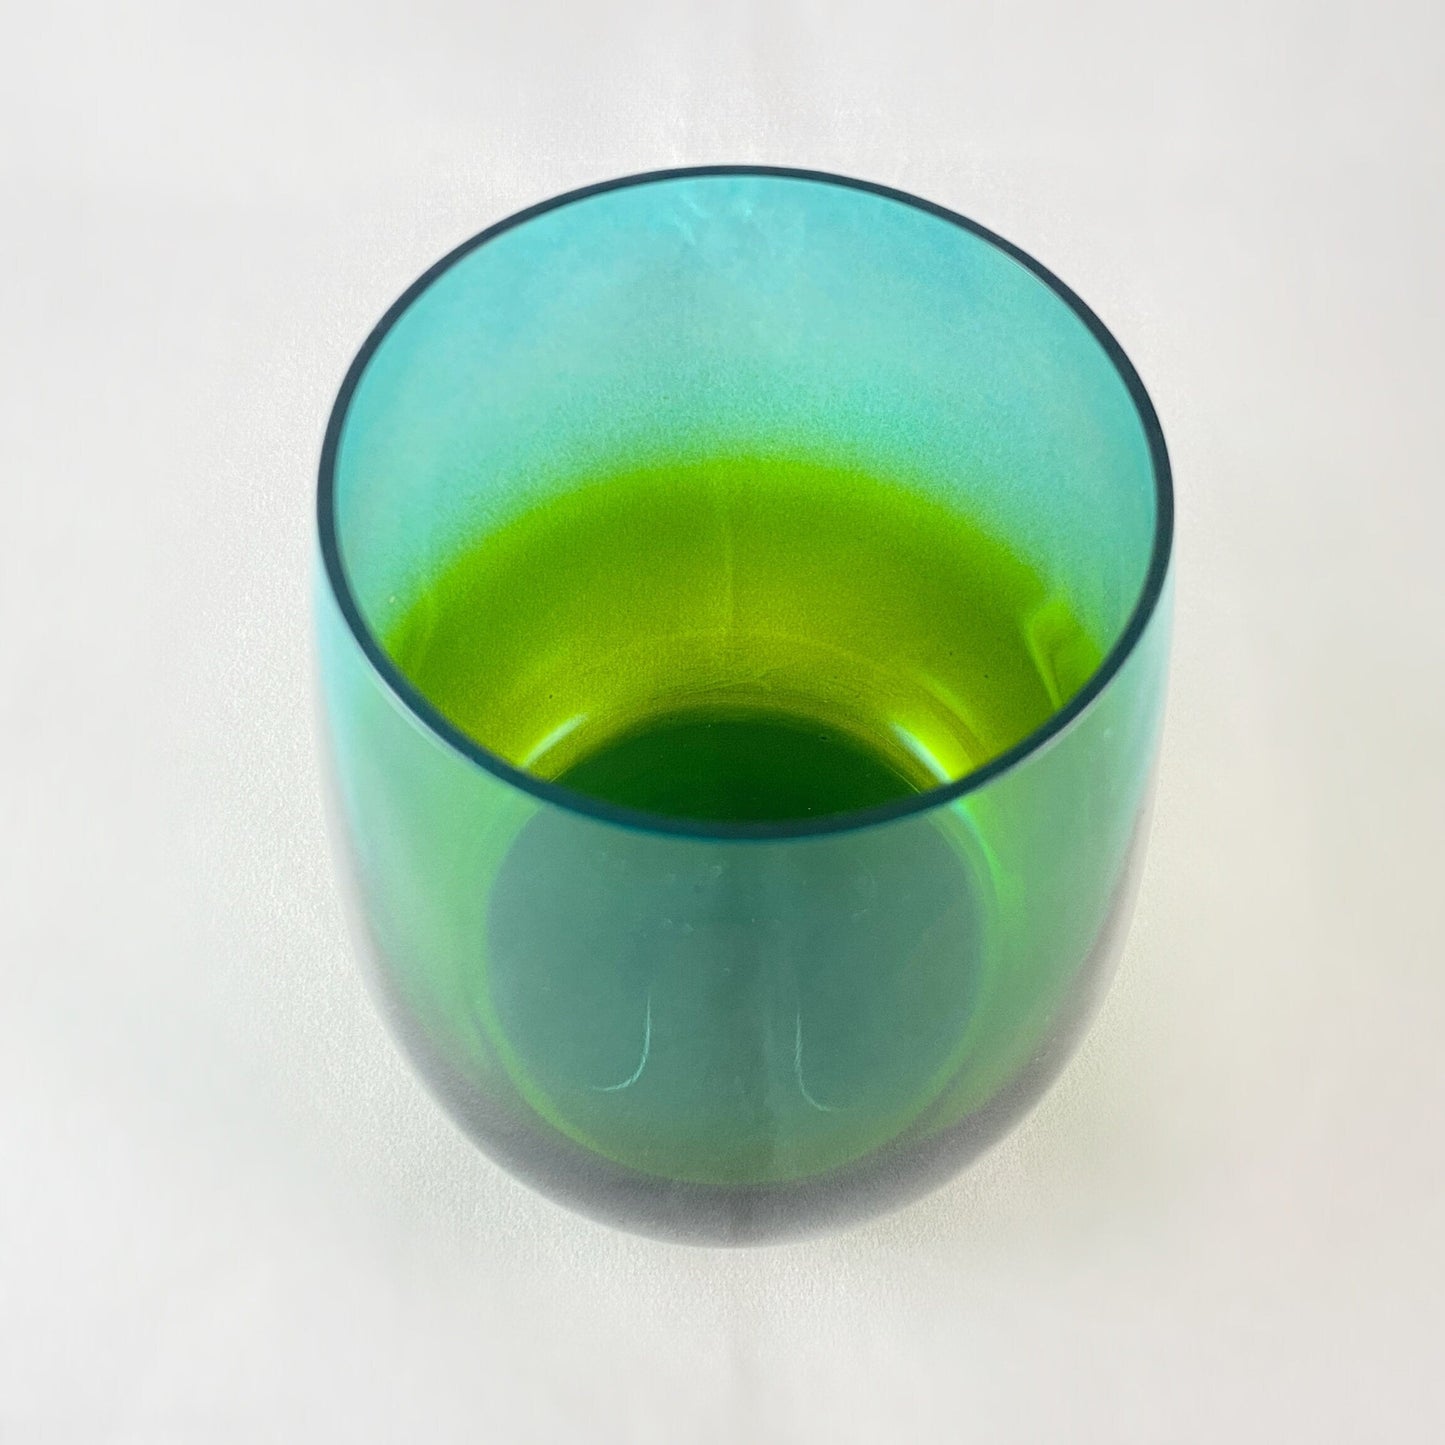 Blue/Green Ombre Gradient Stemless Venetian Wine Glass - Handmade in Italy, Colorful Murano Glass